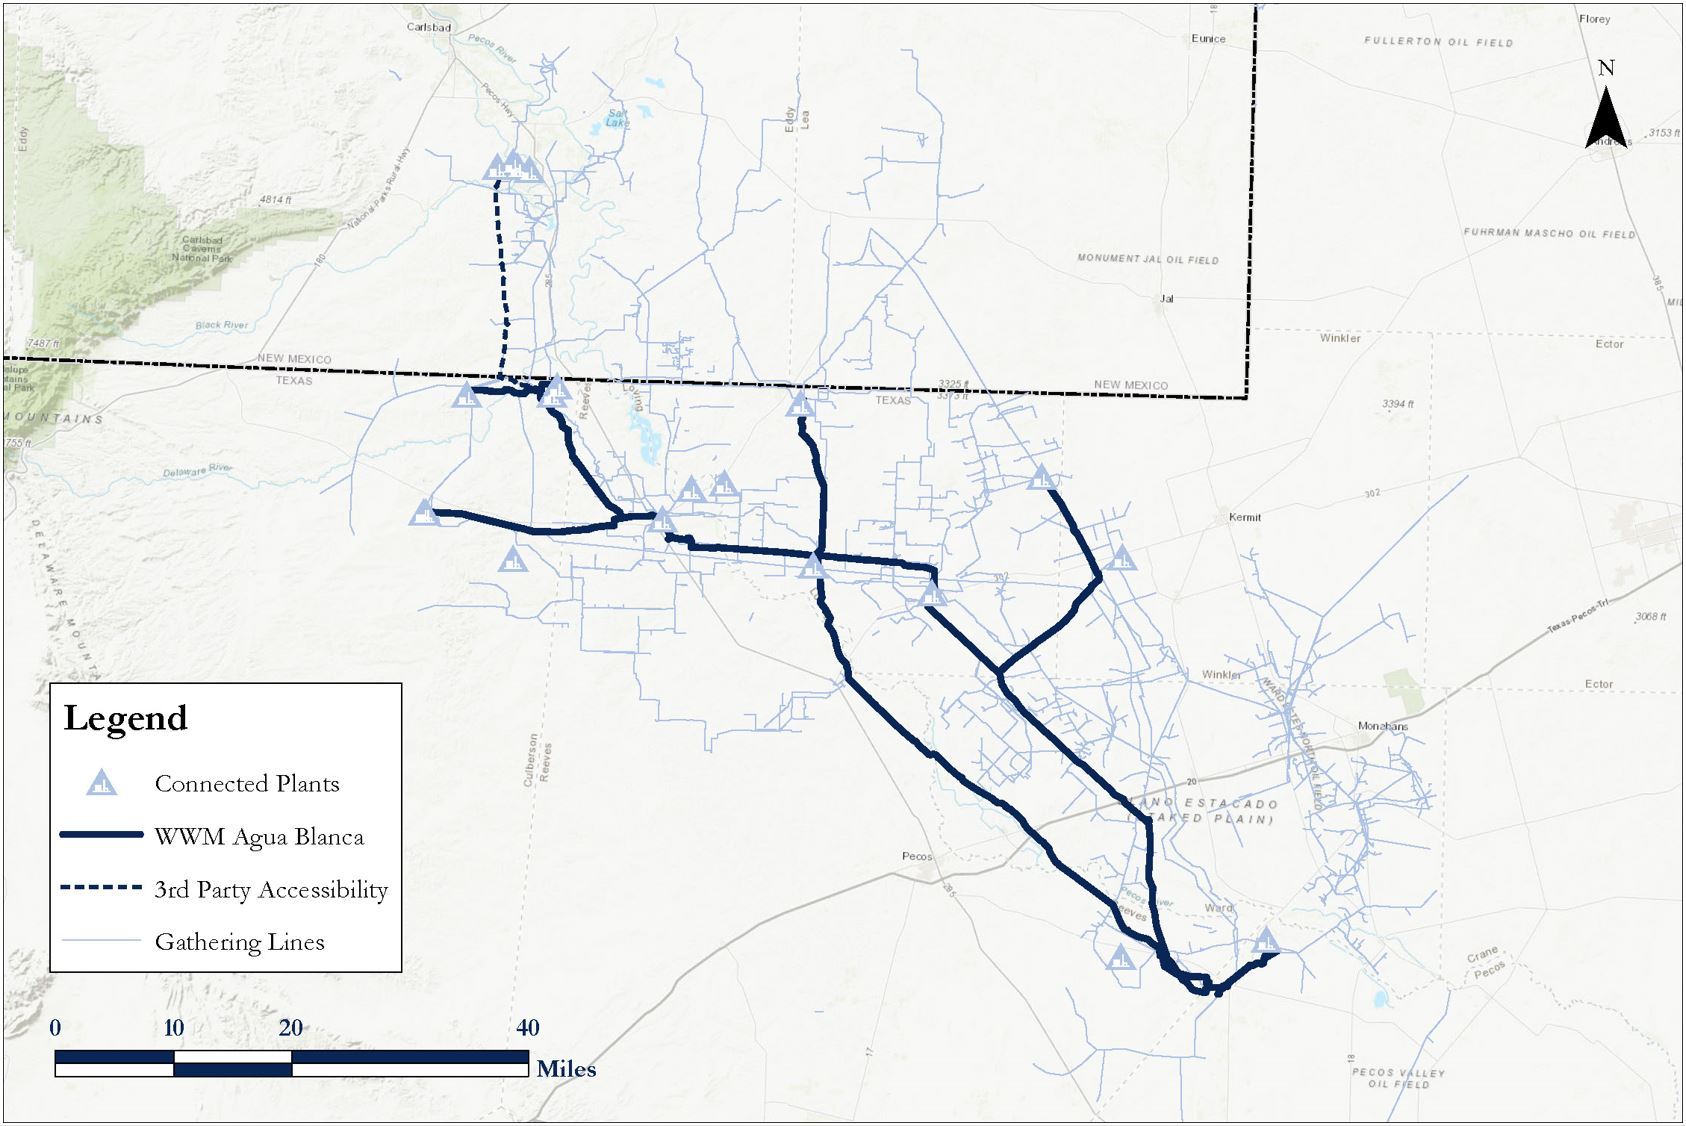 Agua Blanca Pipeline System map (Source: Business Wire)